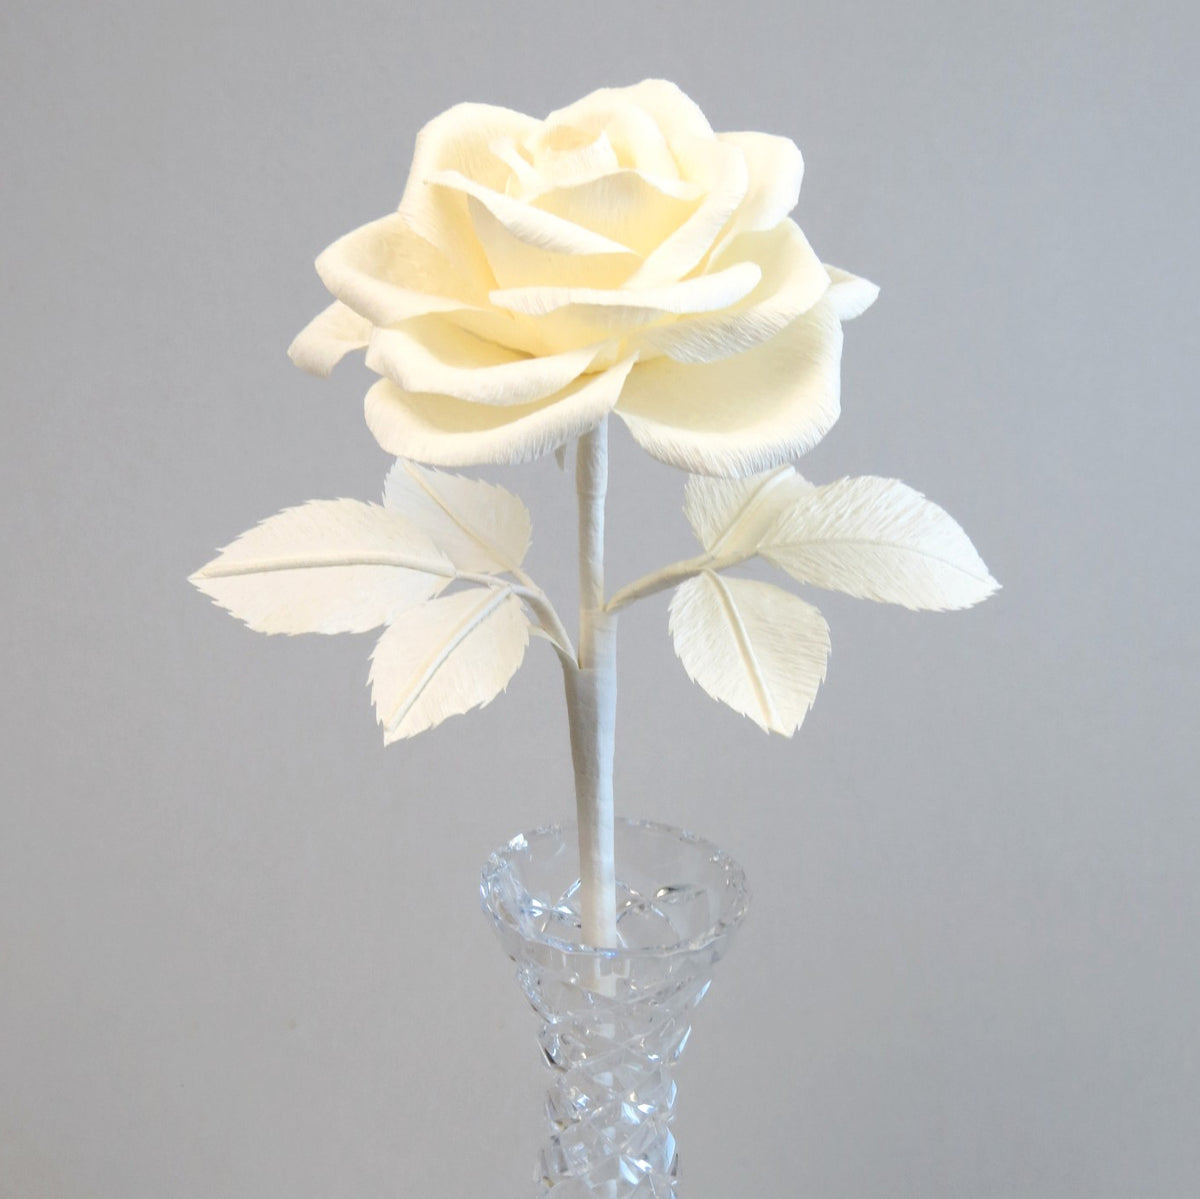 Ivory rose standing upright in crystal vase with 3 ivory leaves emerging from the stem either side of the rose